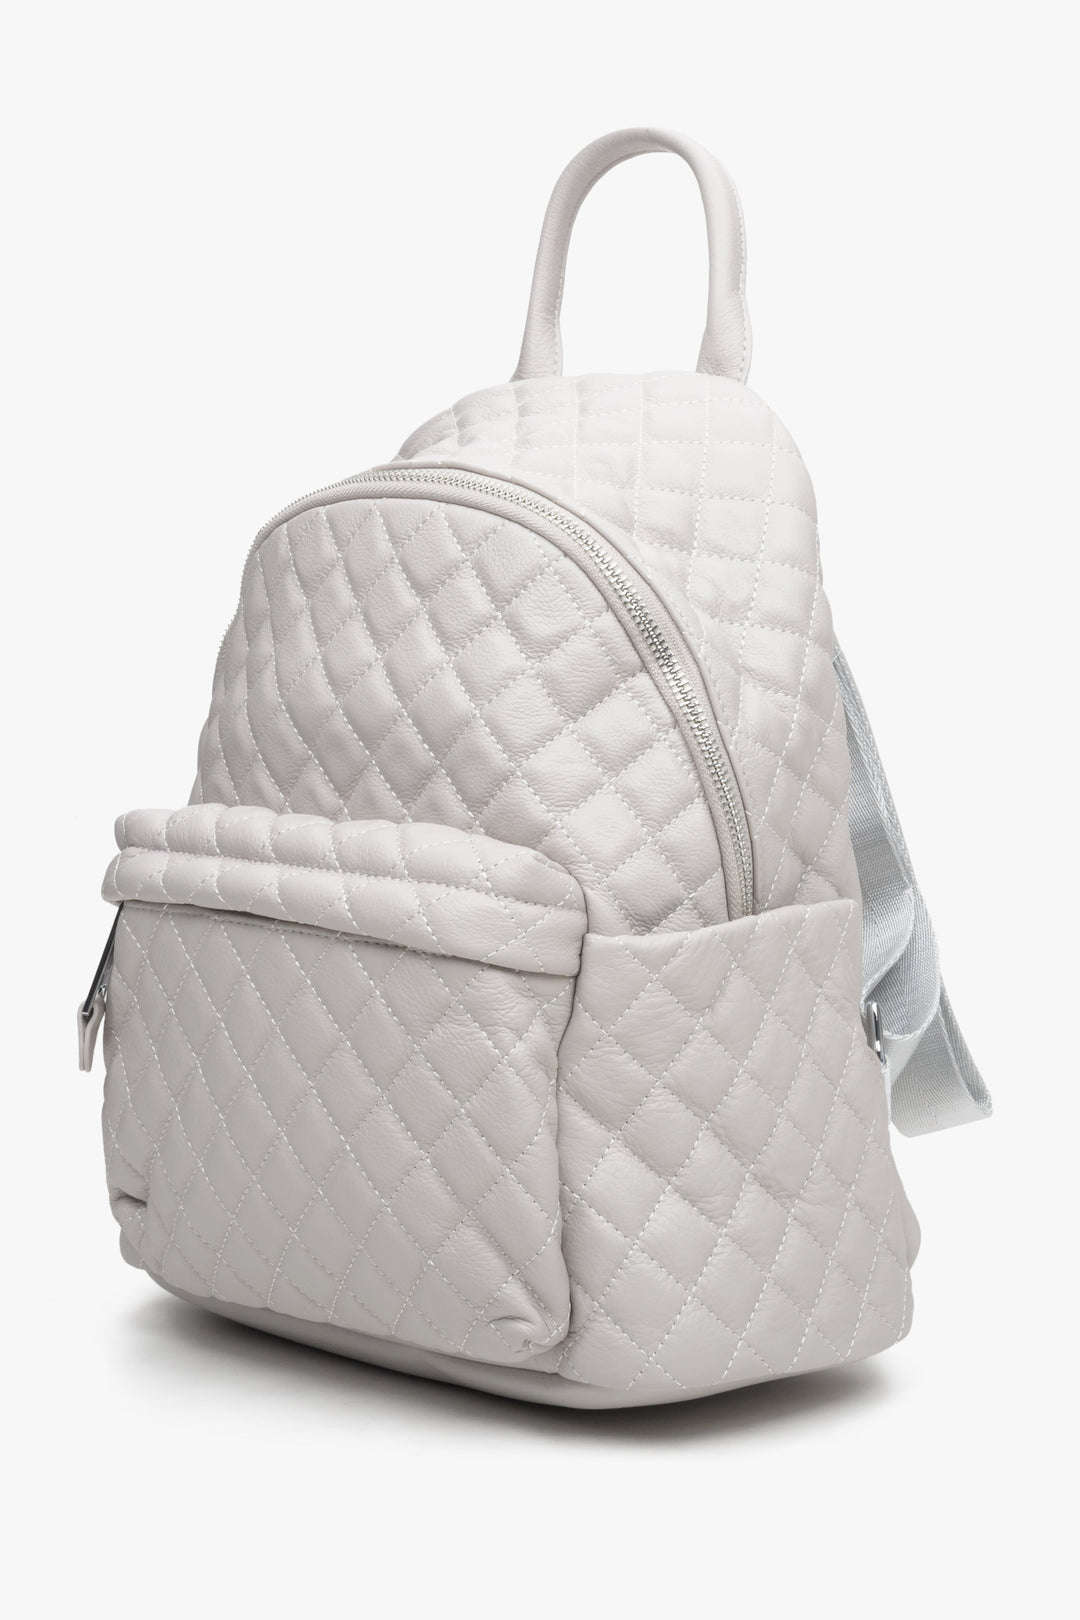 Light beige quilted leather women's backpack by Estro - side view of the model.